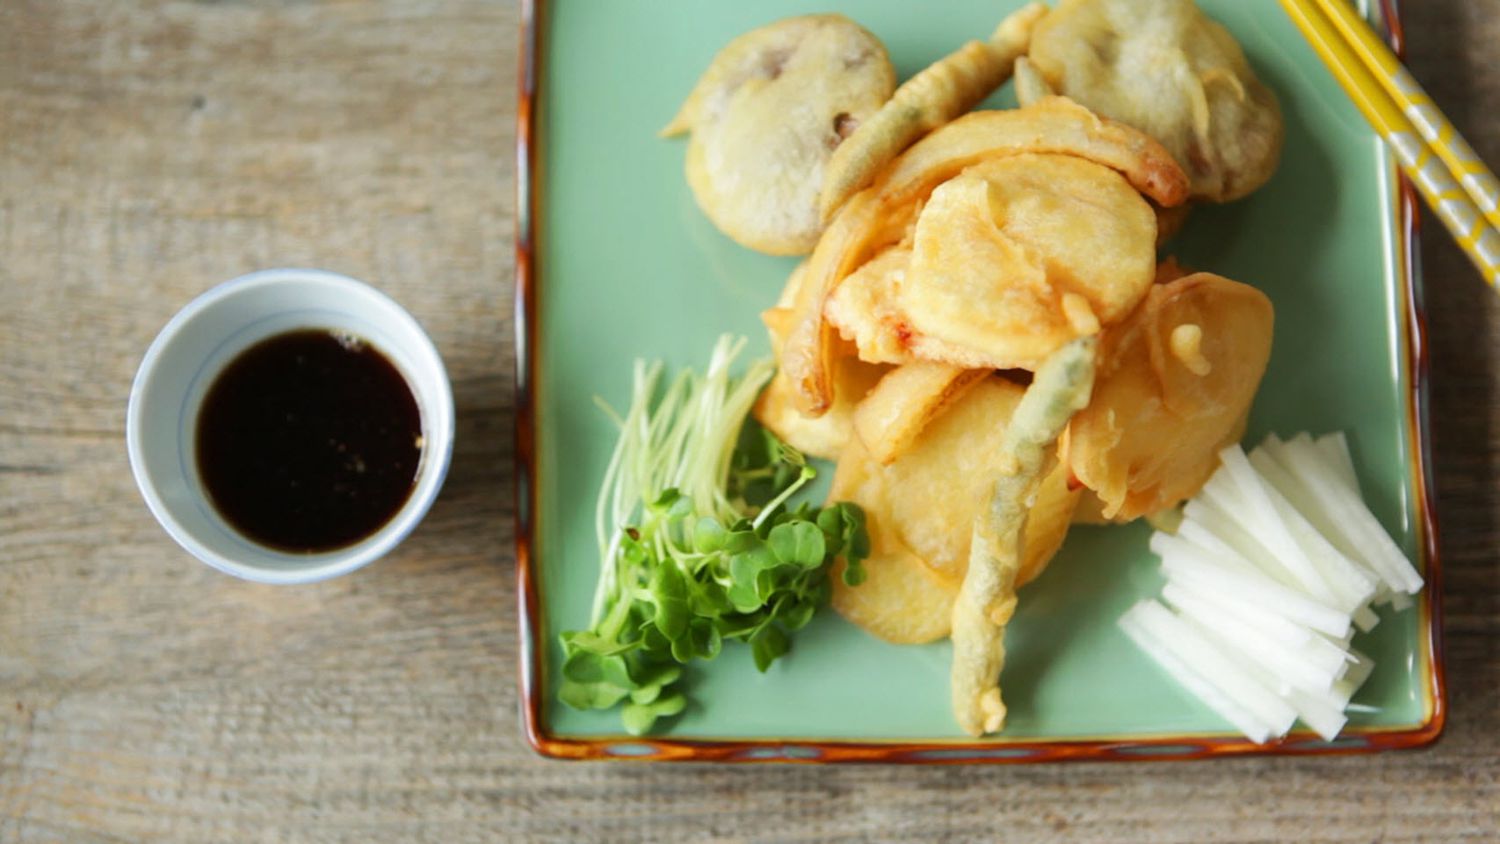 vegetable tempura on blue plate with soy sauce and chopsticks